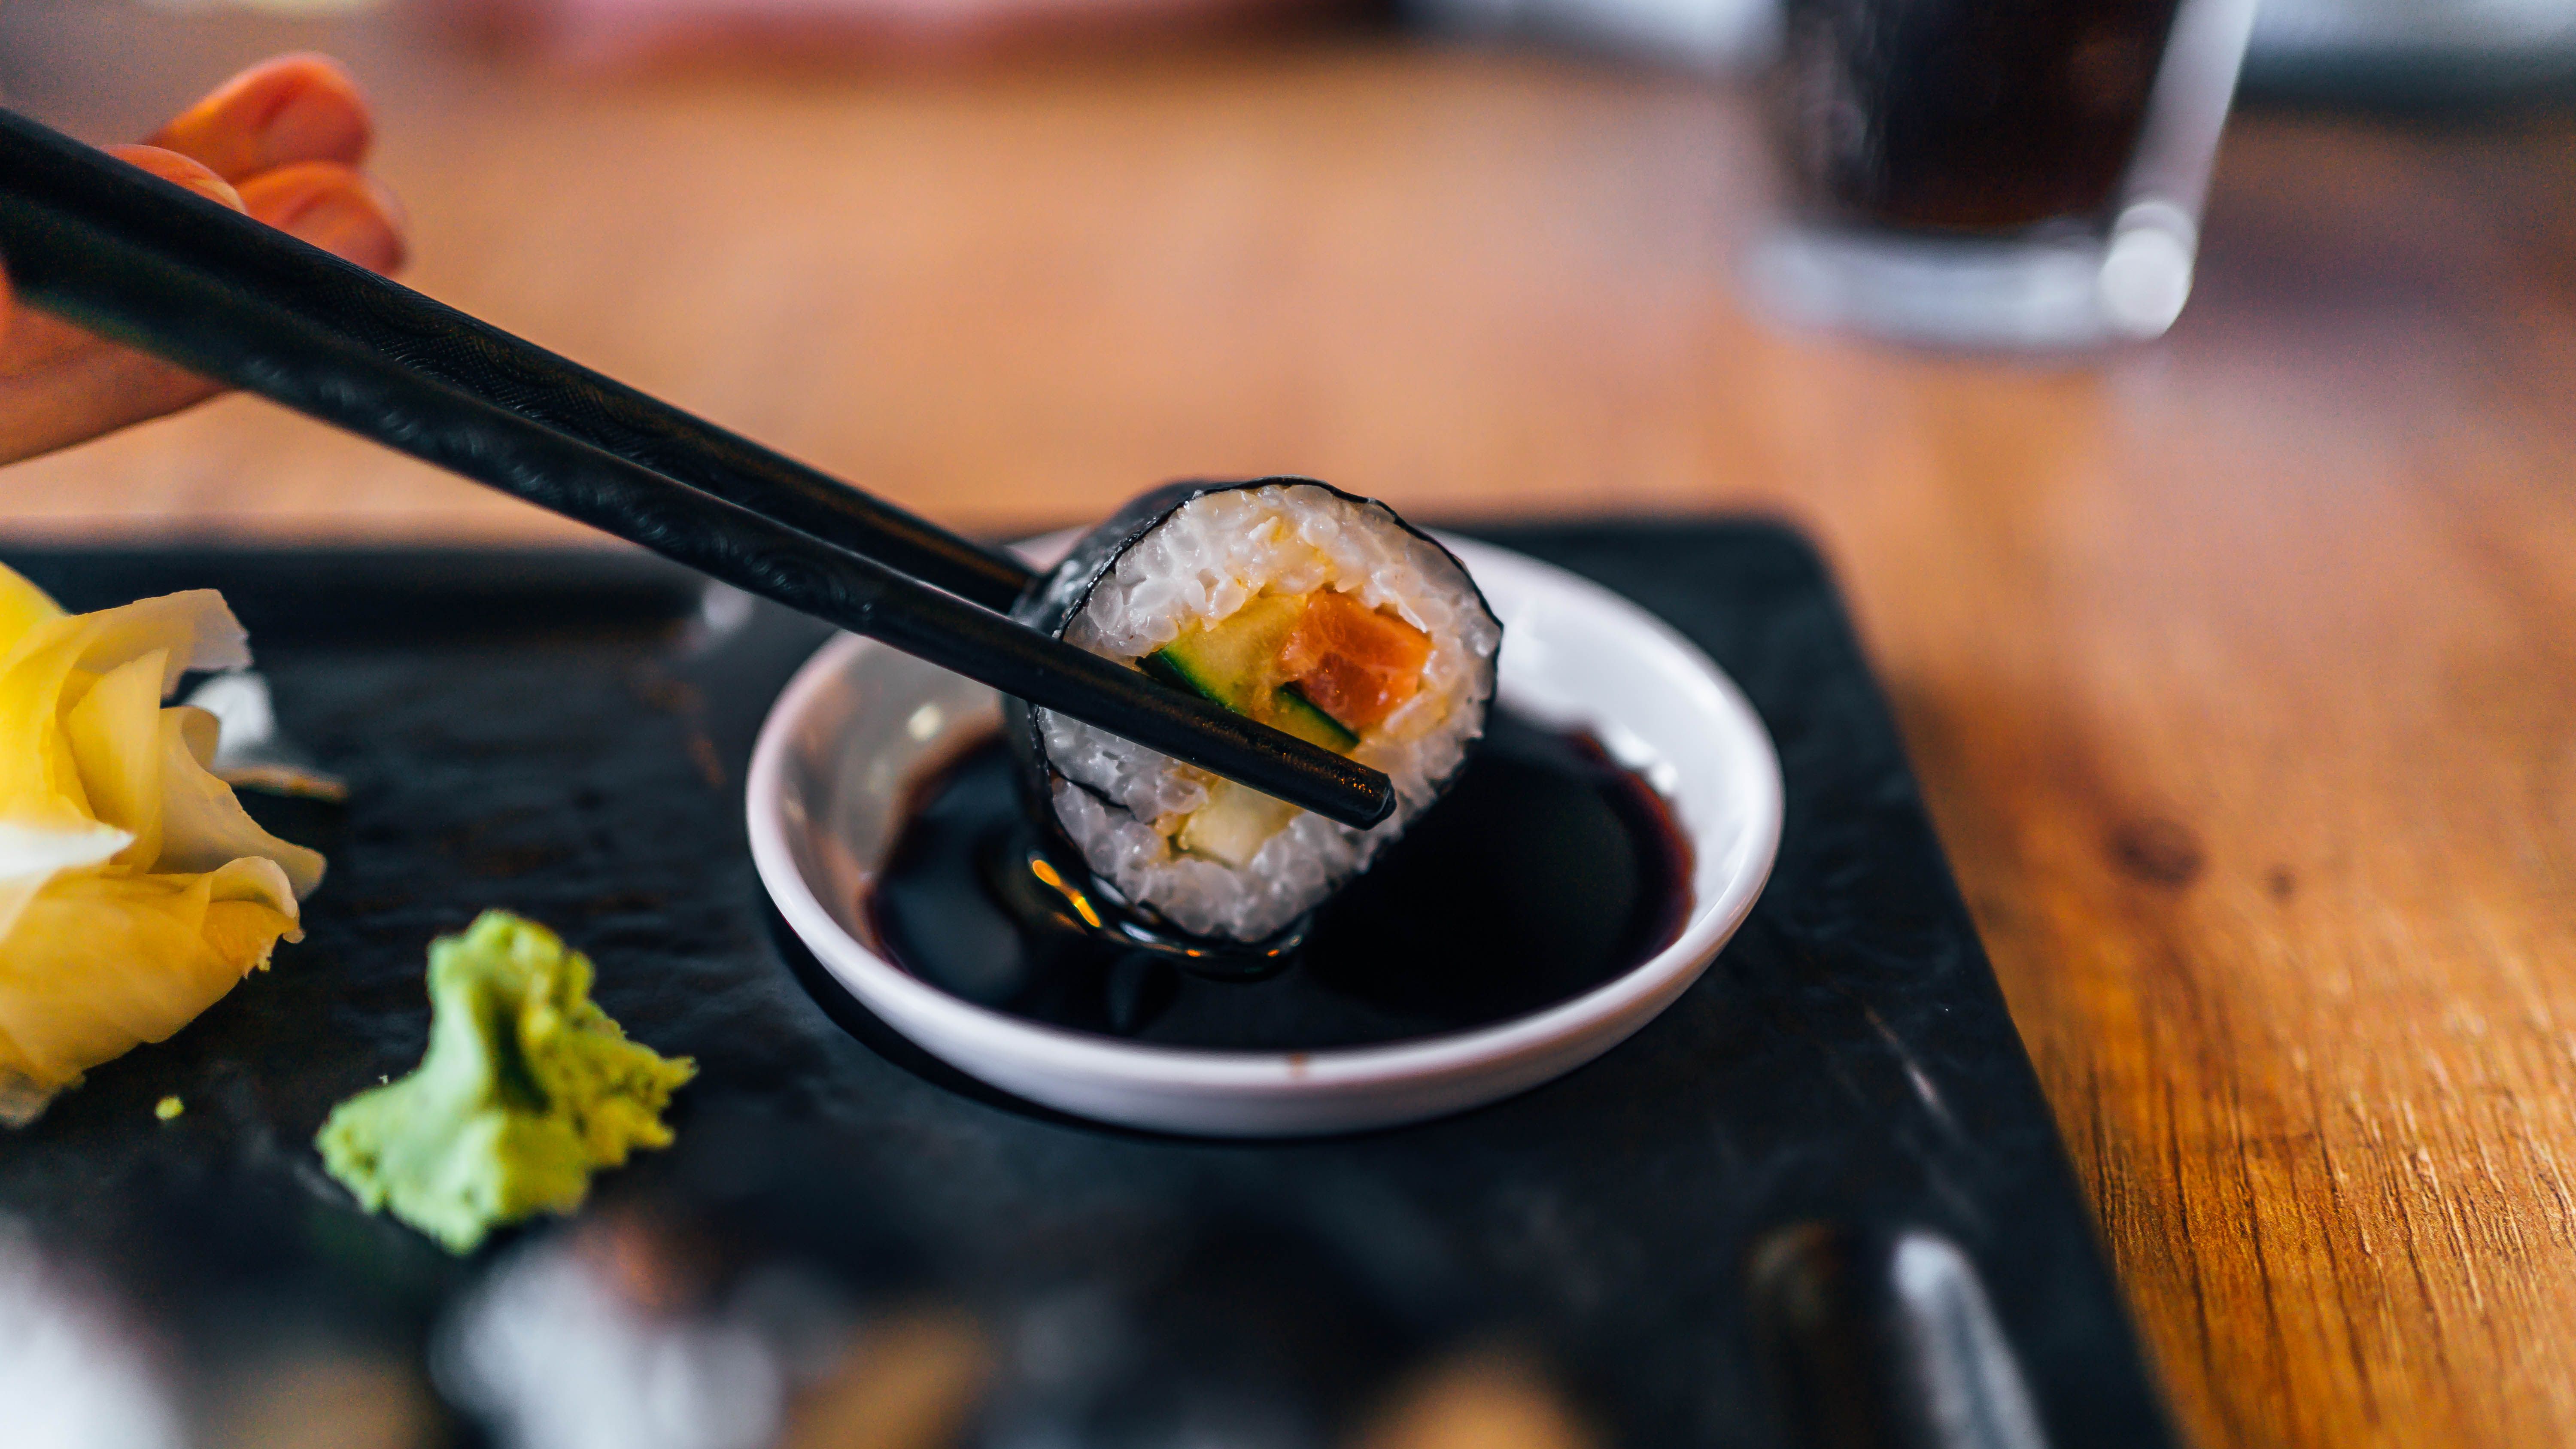 https://hips.hearstapps.com/hmg-prod/images/chopstick-with-sushi-roll-and-soy-sauce-royalty-free-image-1684345304.jpg?crop=1xw:0.84375xh;center,top